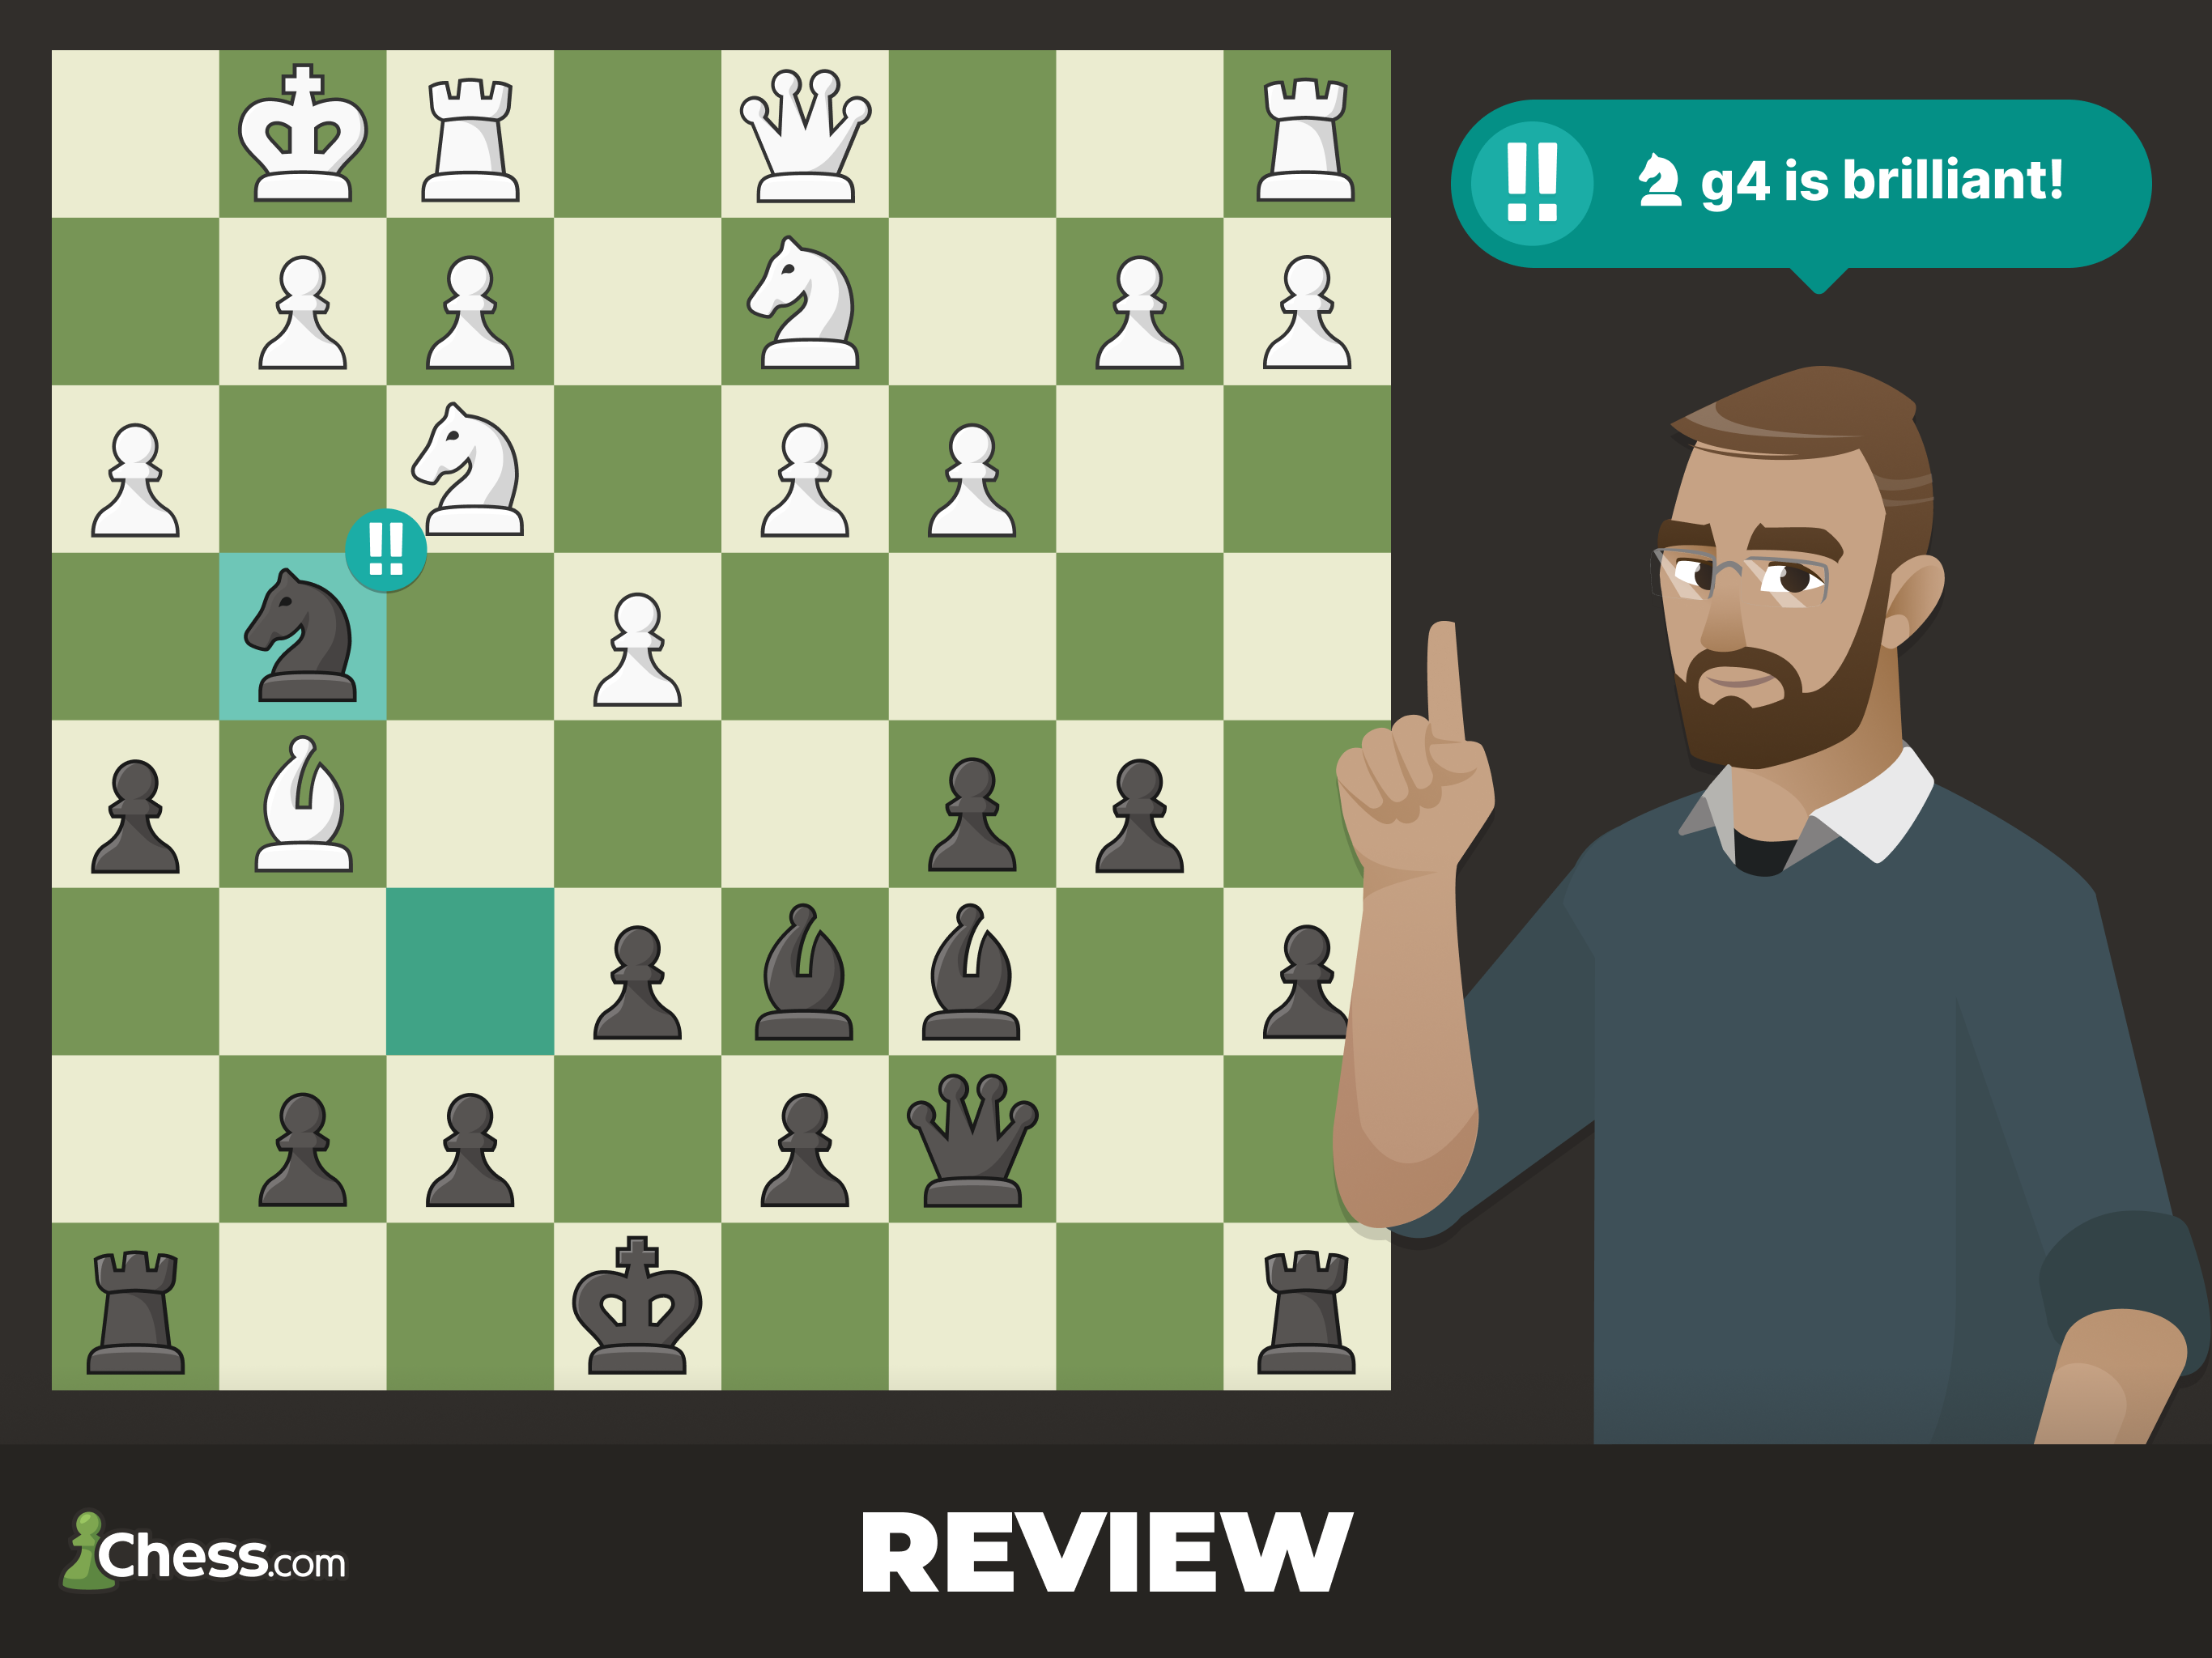 What does 'percentile' mean? - Chess.com Member Support and FAQs